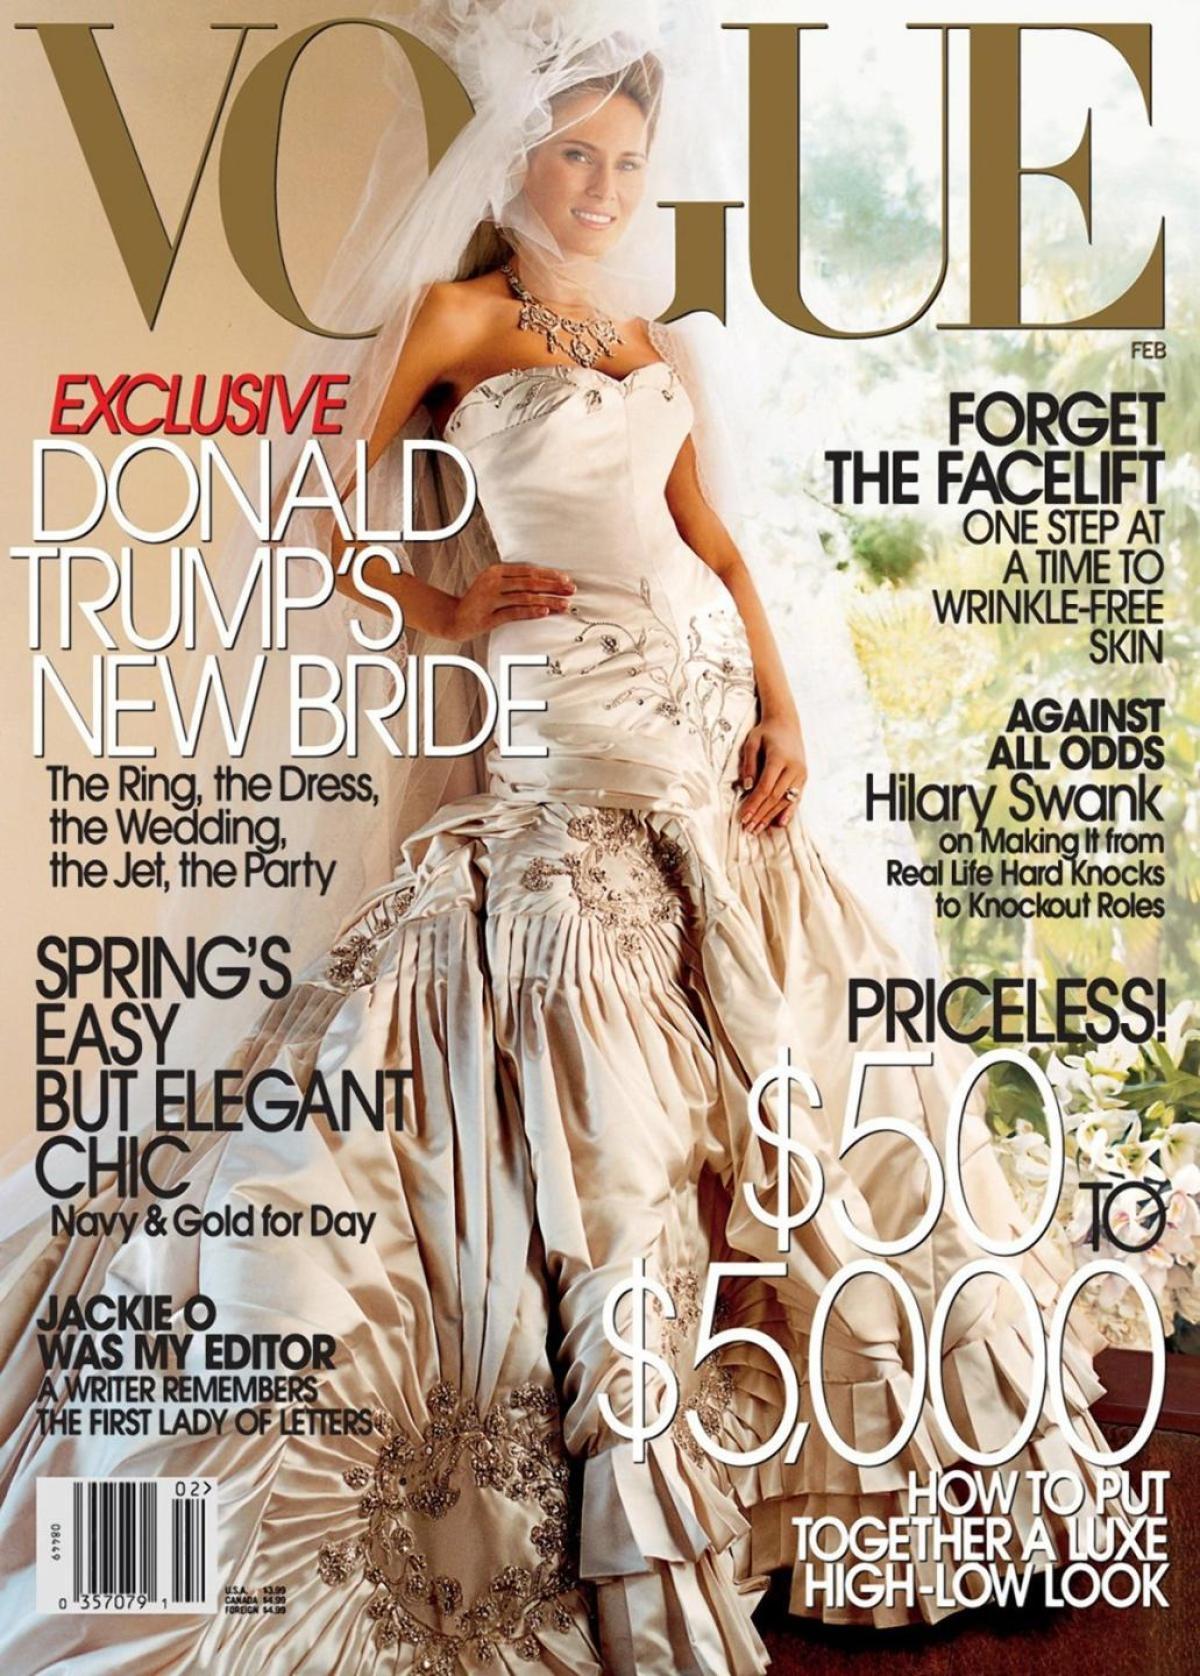 Vogue featured Melania Trump on its cover back in 2005